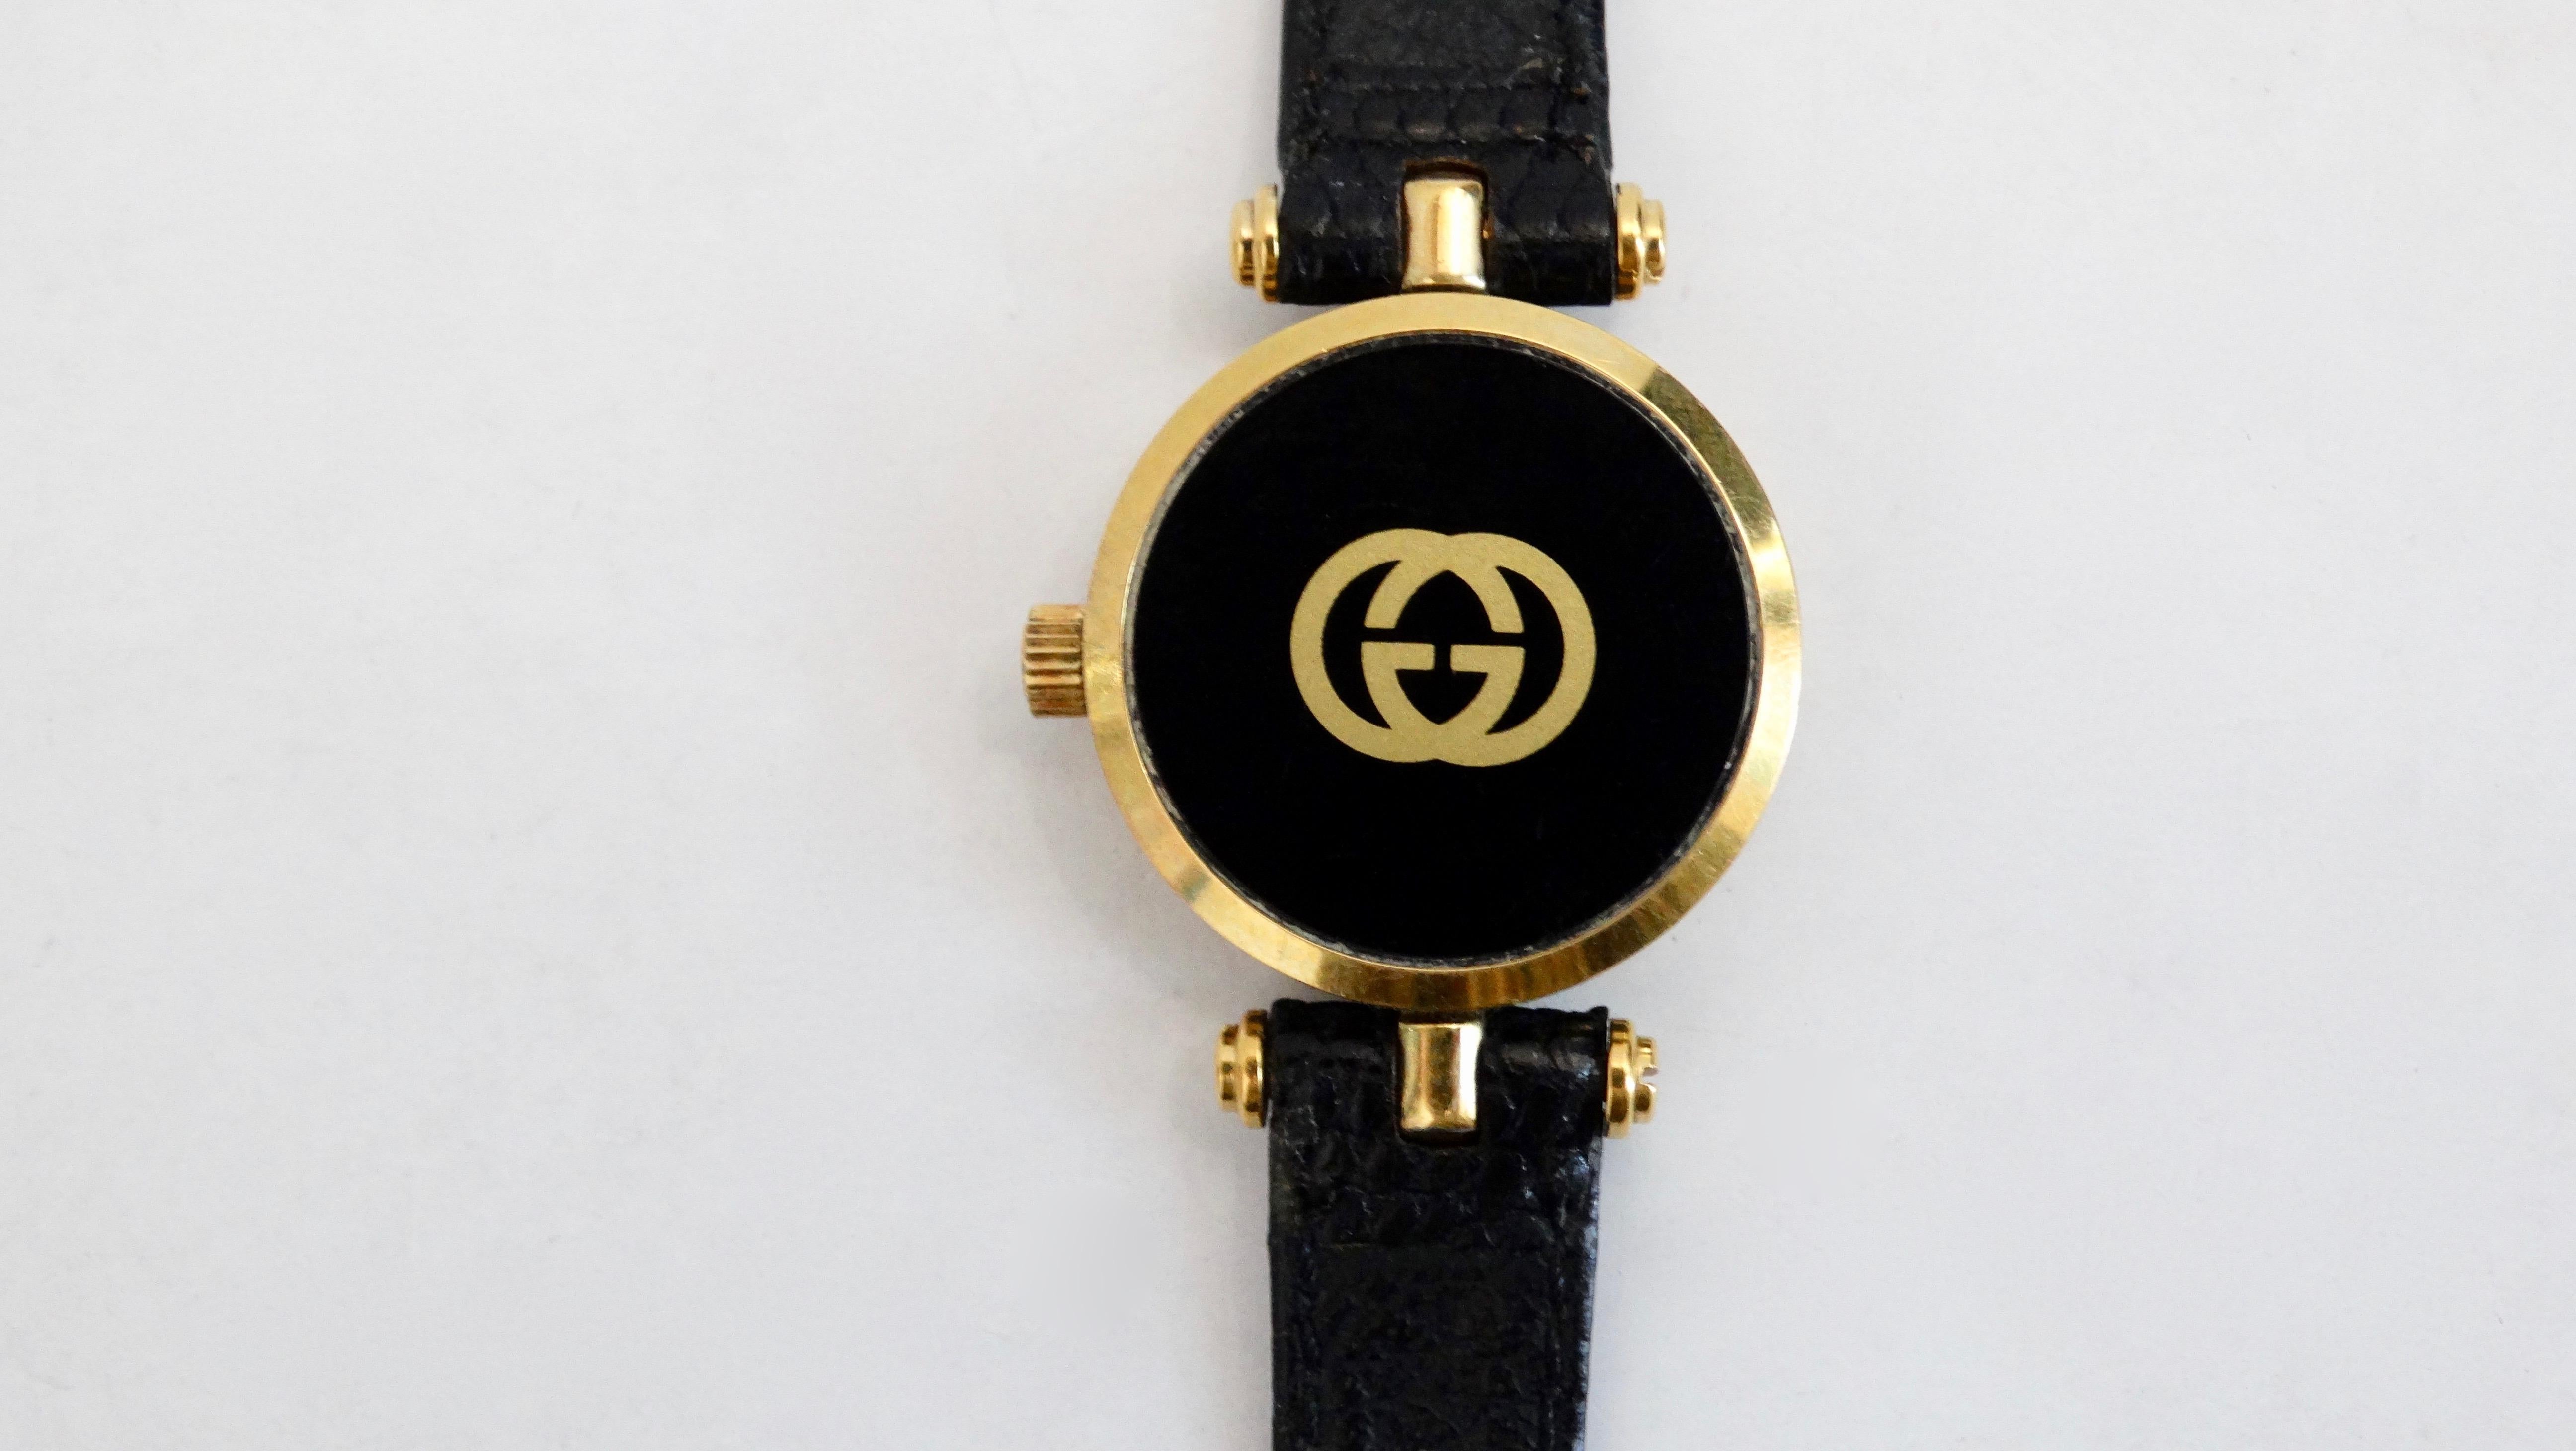 A classic timepiece to complete all your look! Circa 1980s , this watch is features a solid black face with gold roman numerals. Hardware cast in gold metal accented with black enamel stripes on the side. Buckle embossed with the classic GG logo,